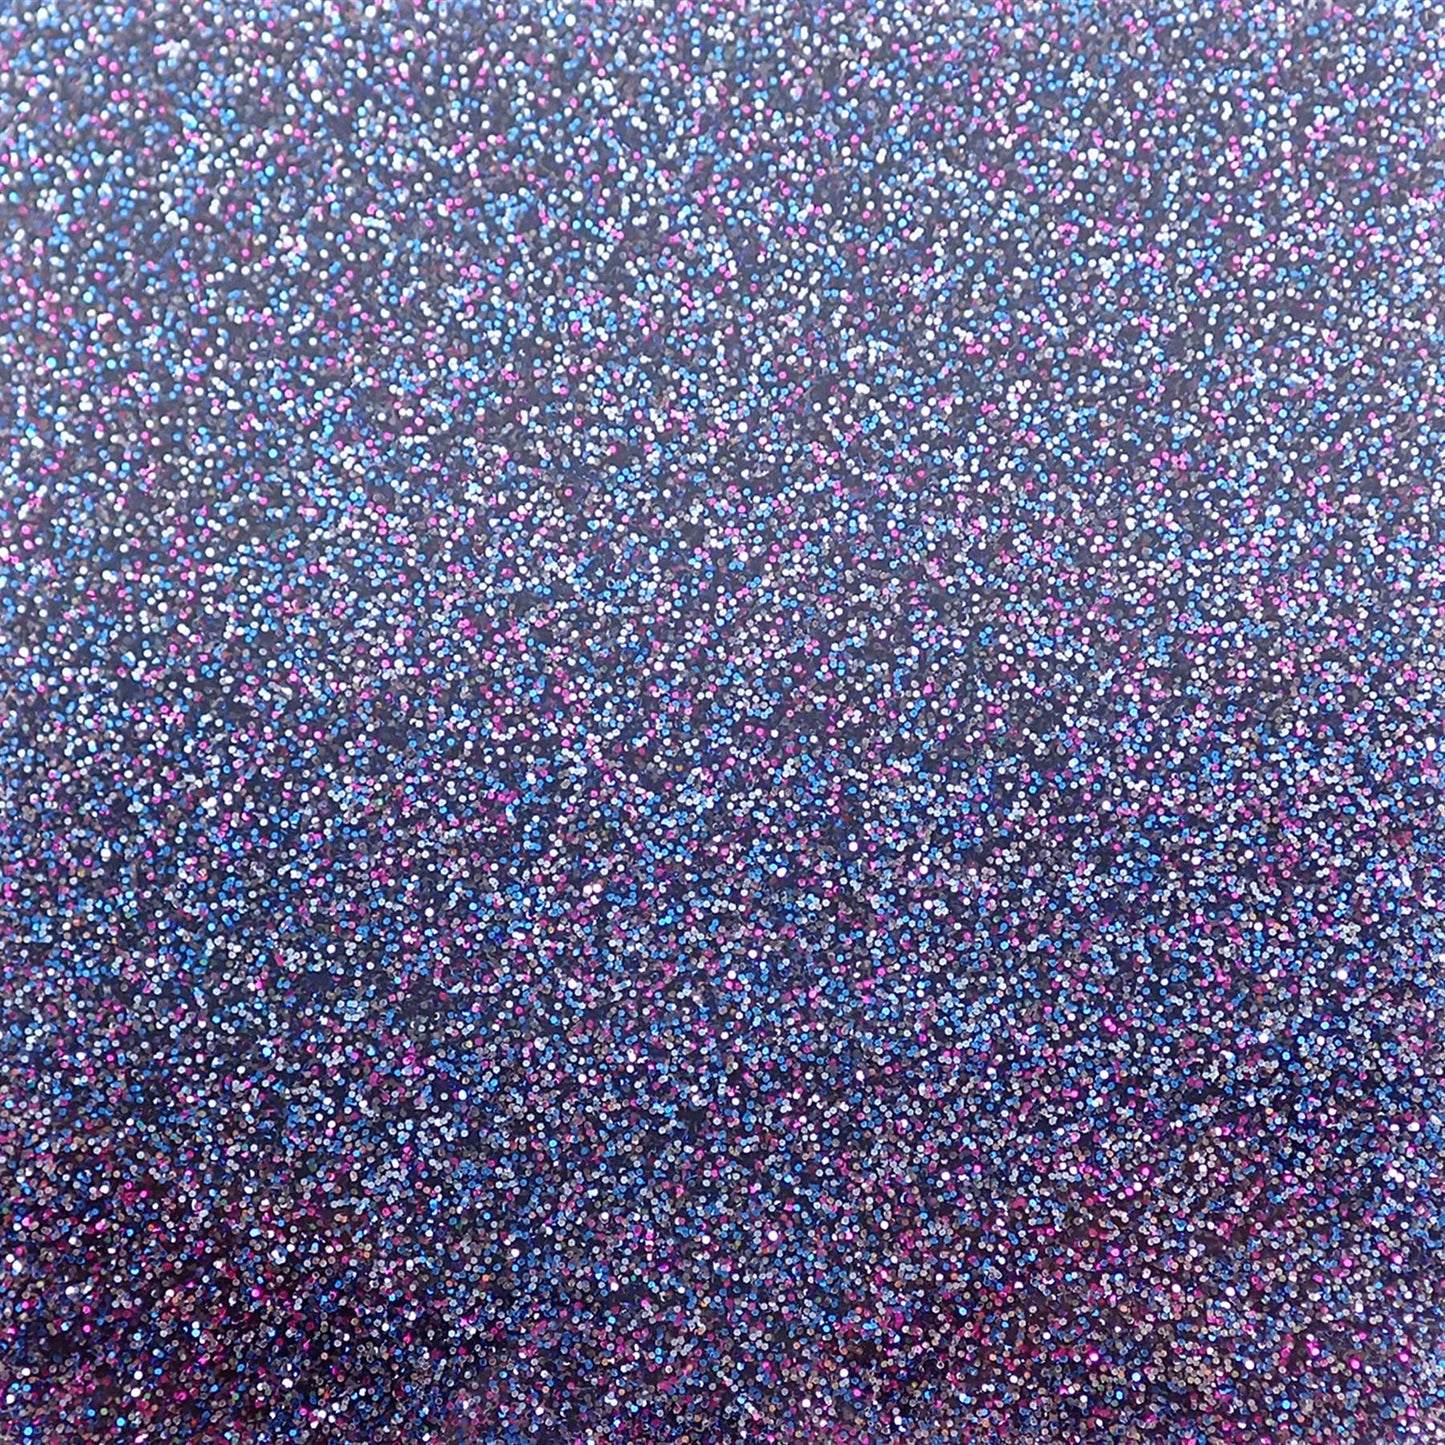 Incudo Blue 2-Sided Holographic Glitter Acrylic Sheet - 98x98x3mm (3.9x3.86x0.12"), Sample